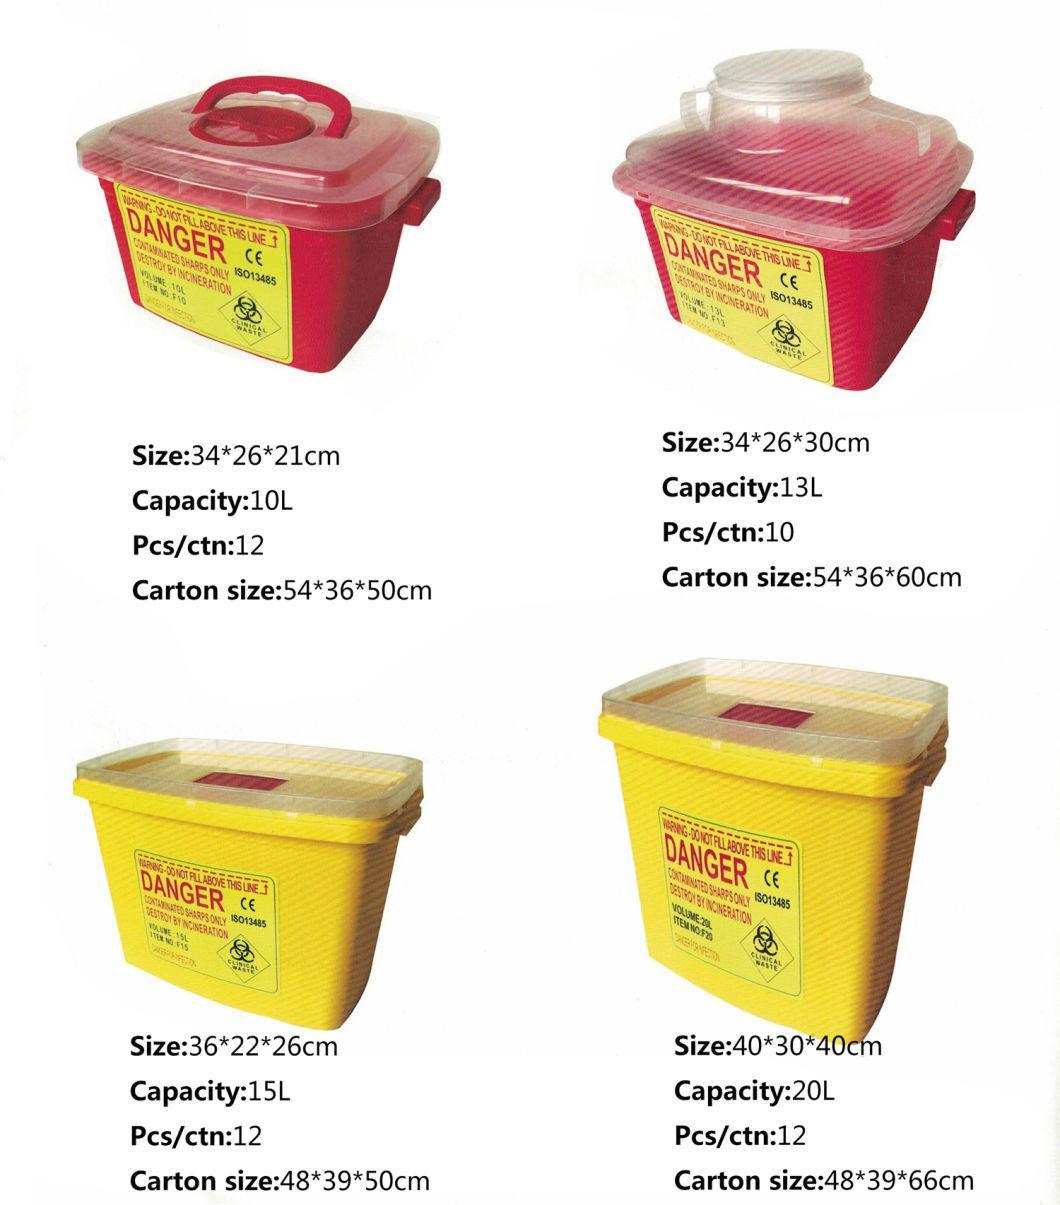 PP Plastic Safety Box Biohazard Needle Sharps Disposal Syringe Container Bin with Handle